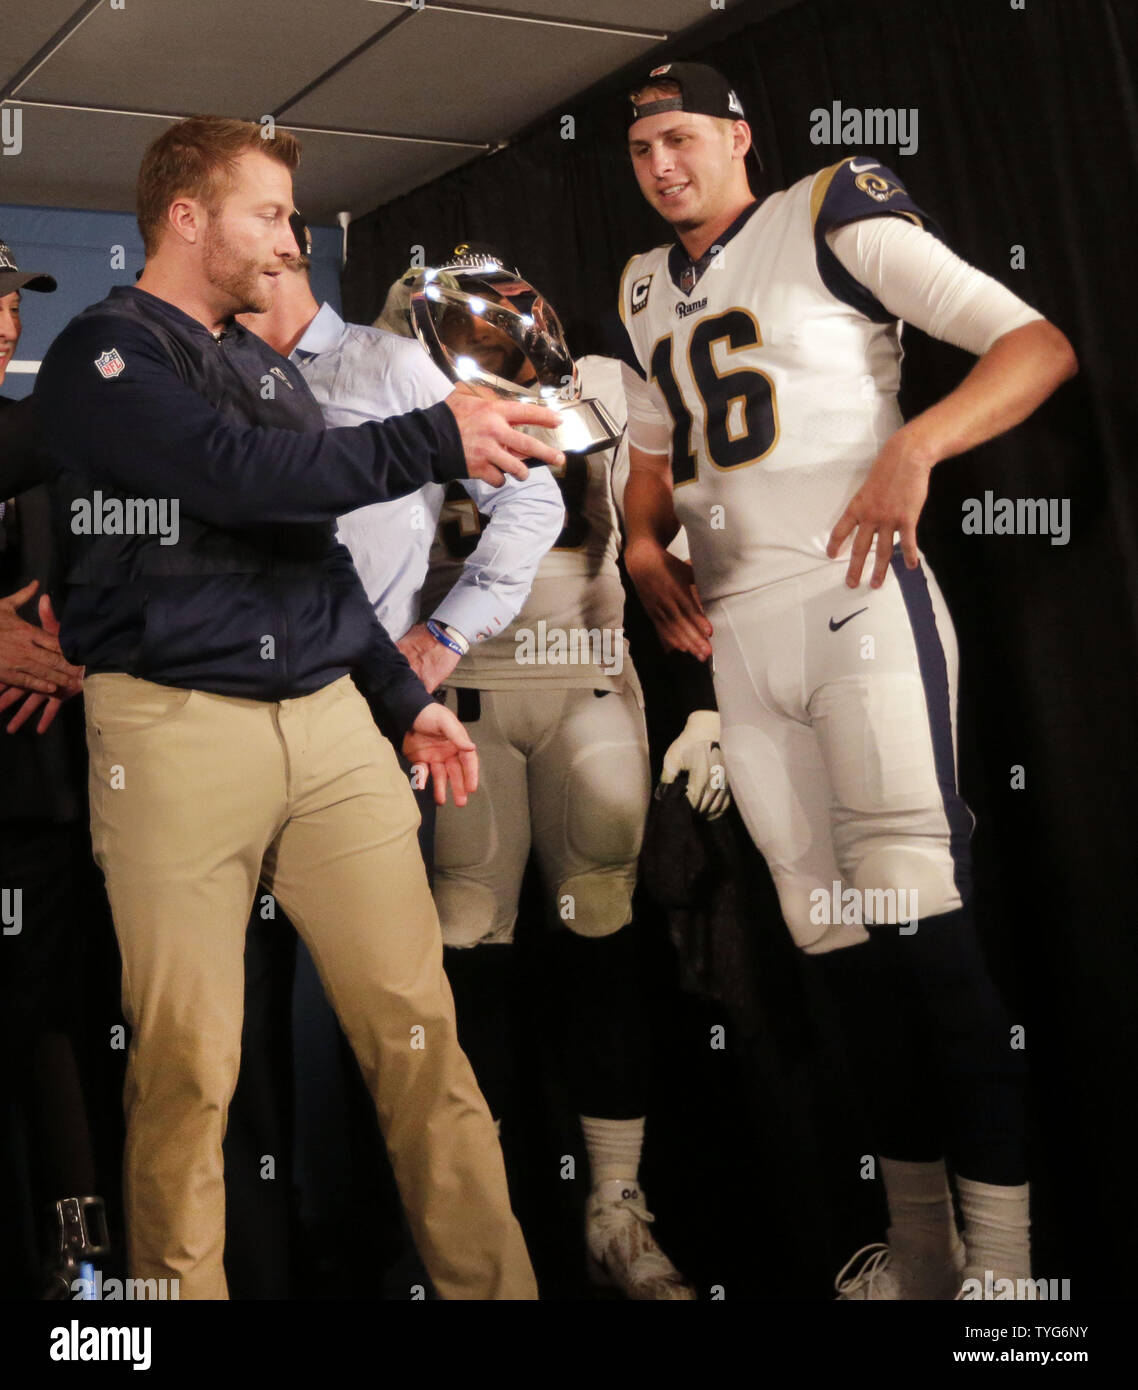 Los Angeles Rams head coach Sean McVay hands the NFC Championship trophy to  Rams quarterback Jared Goff (16) after beating the New Orleans Saints in  overtime at the Mercedes-Benz Superdome in New